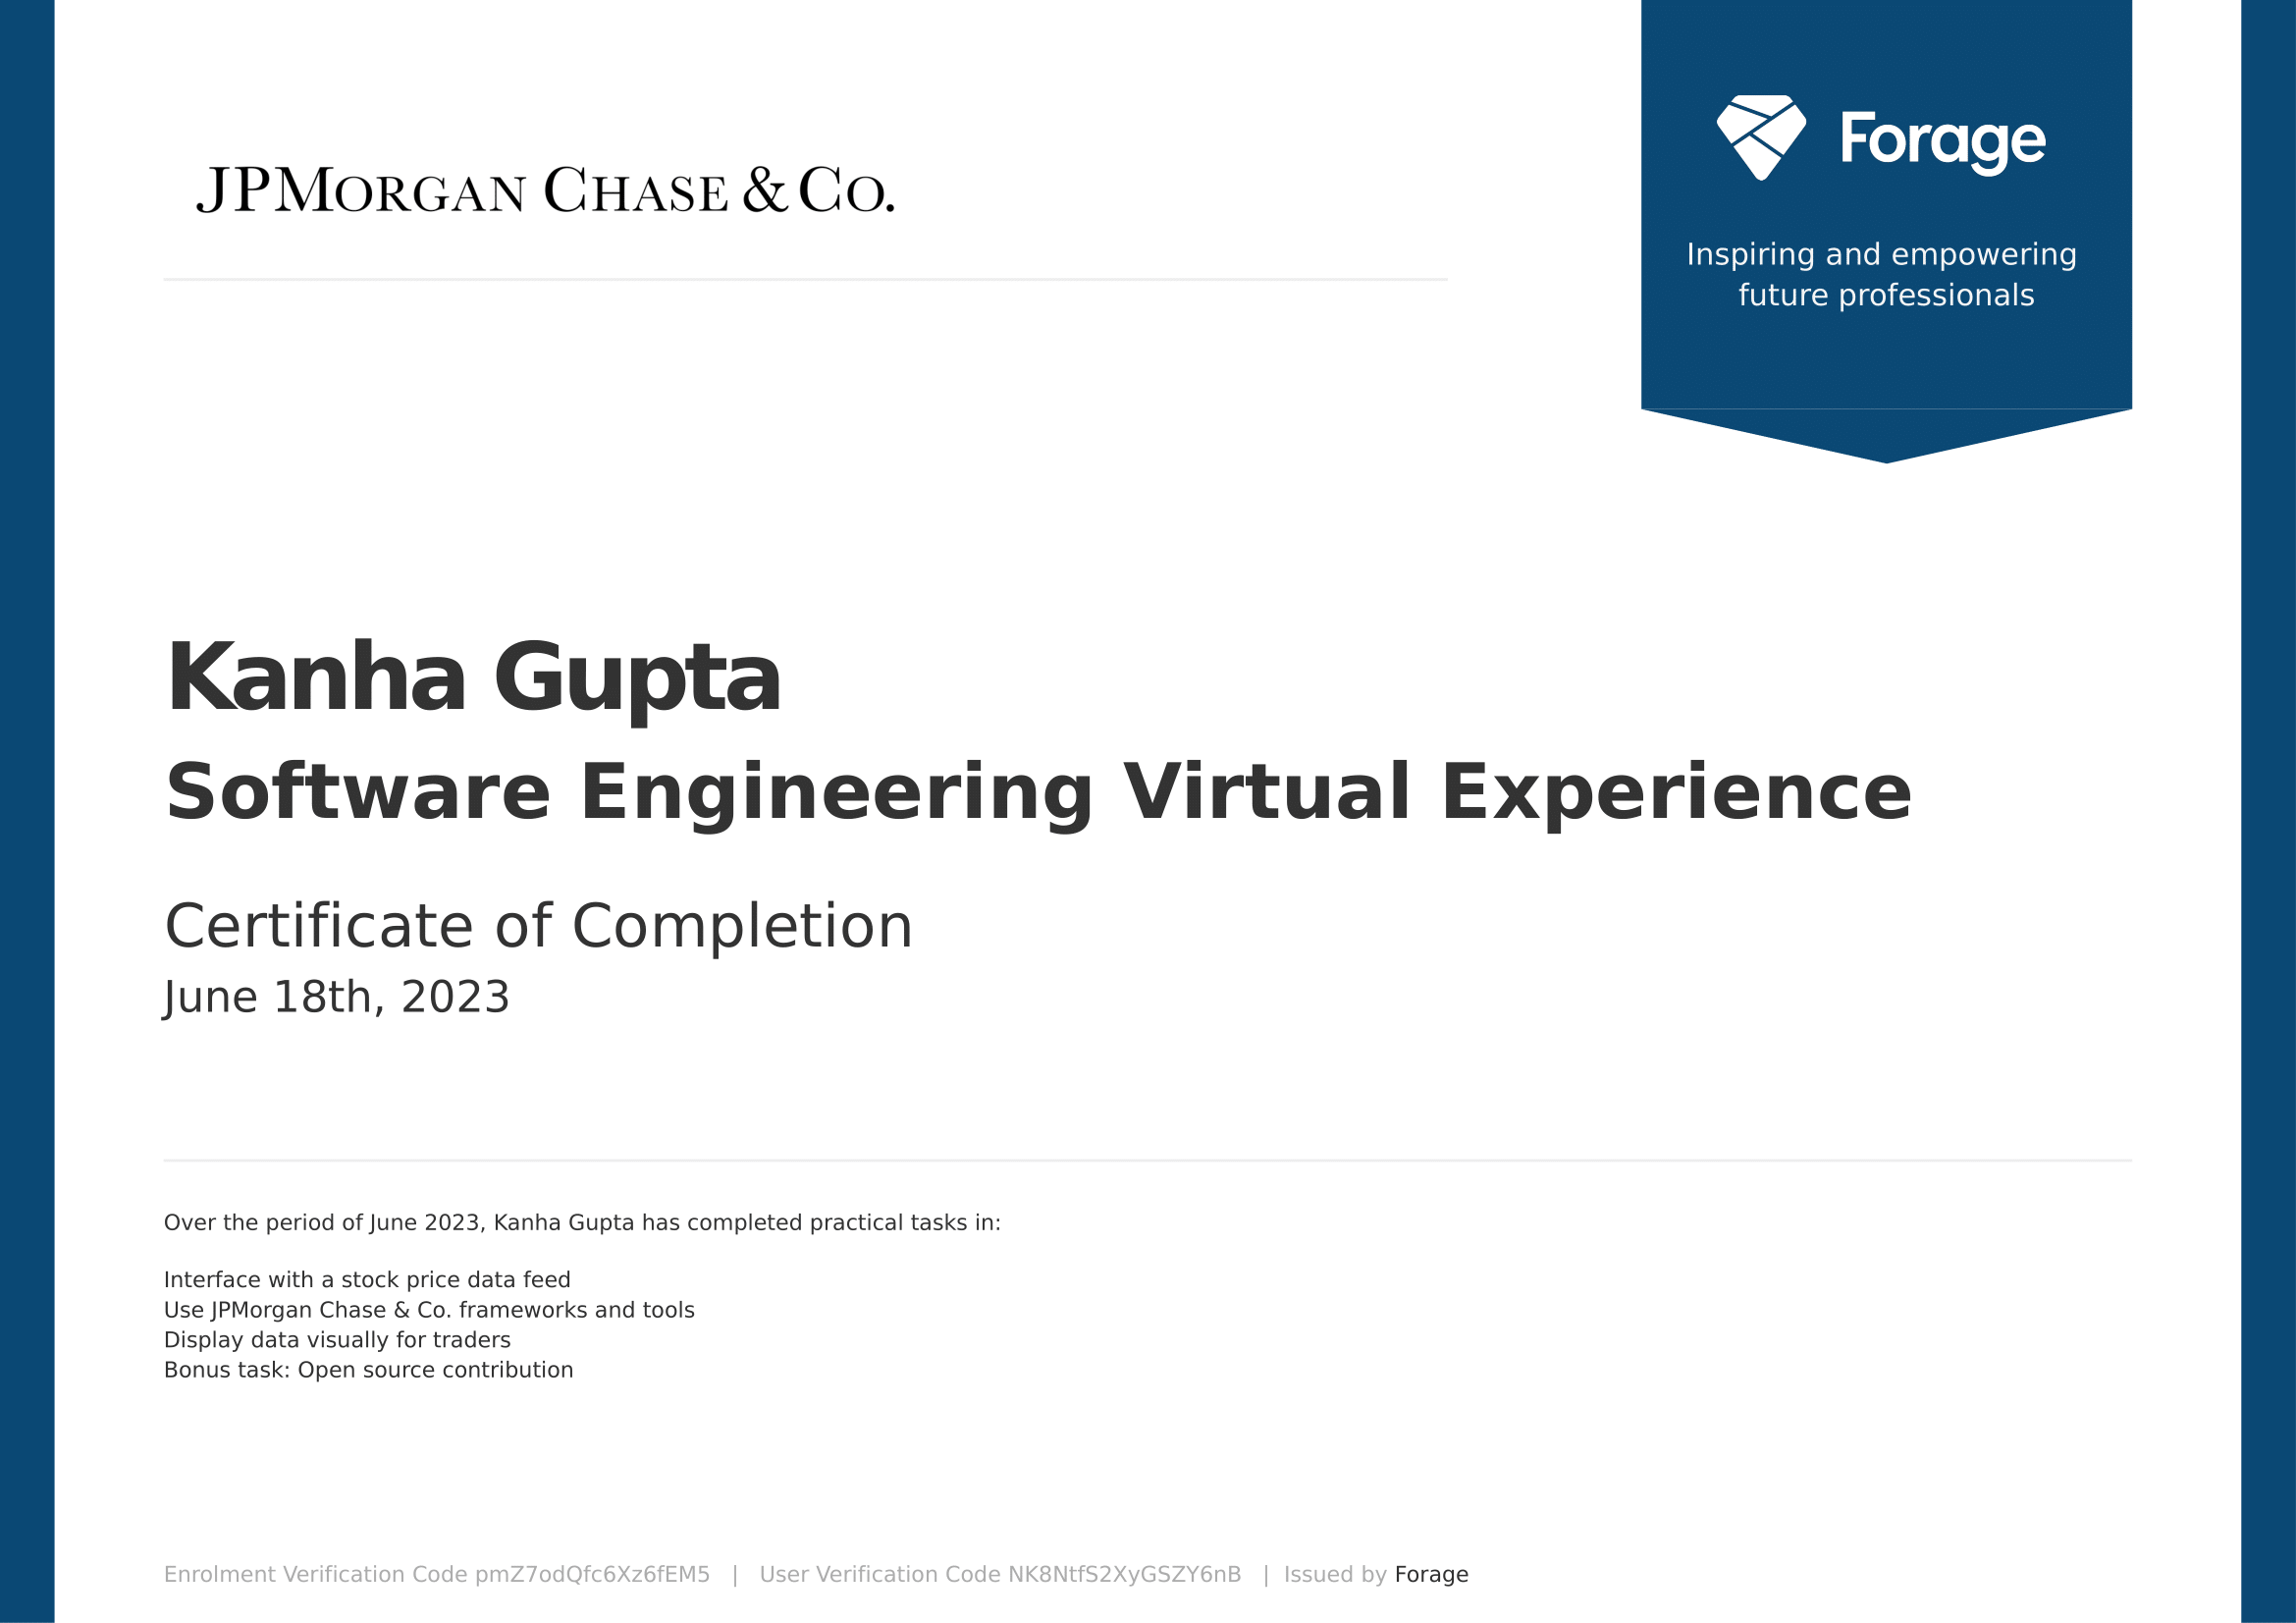 Software Engineering Virtual Experience, J.P. Morgan Chase & Co. (Issued By Forage)